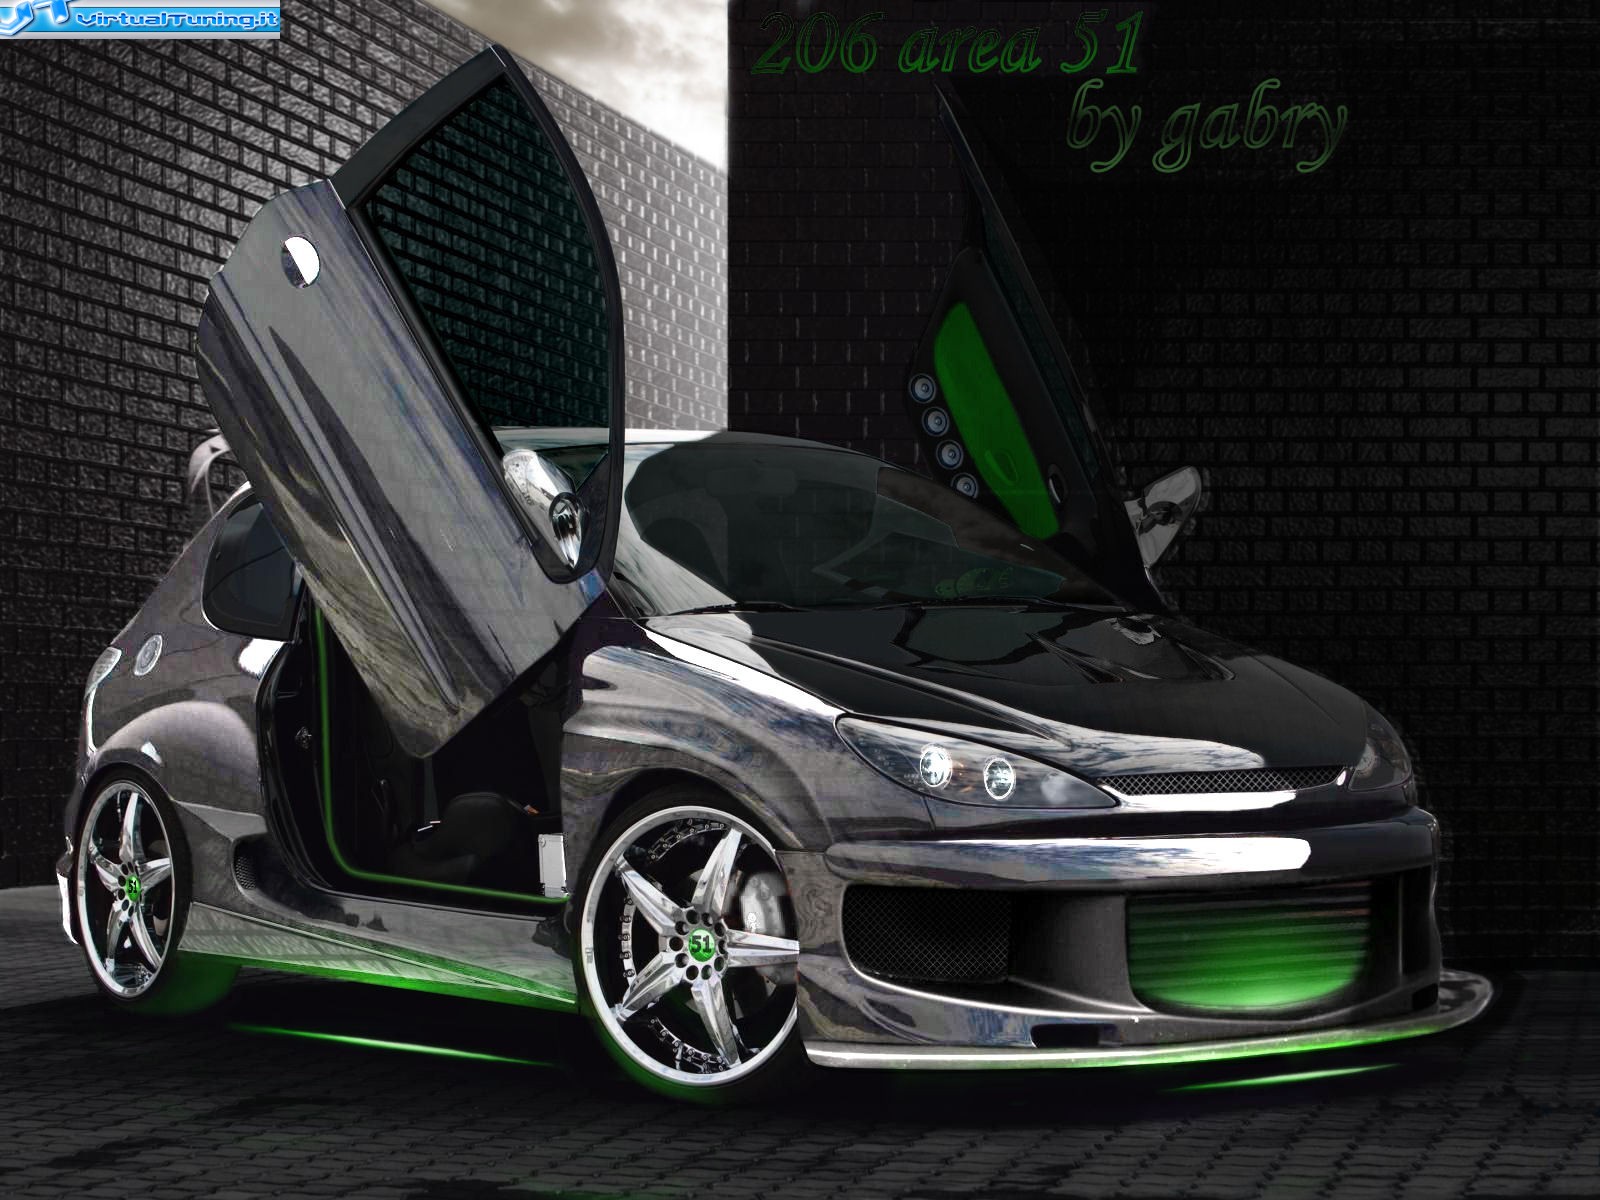 VirtualTuning PEUGEOT 206 by 